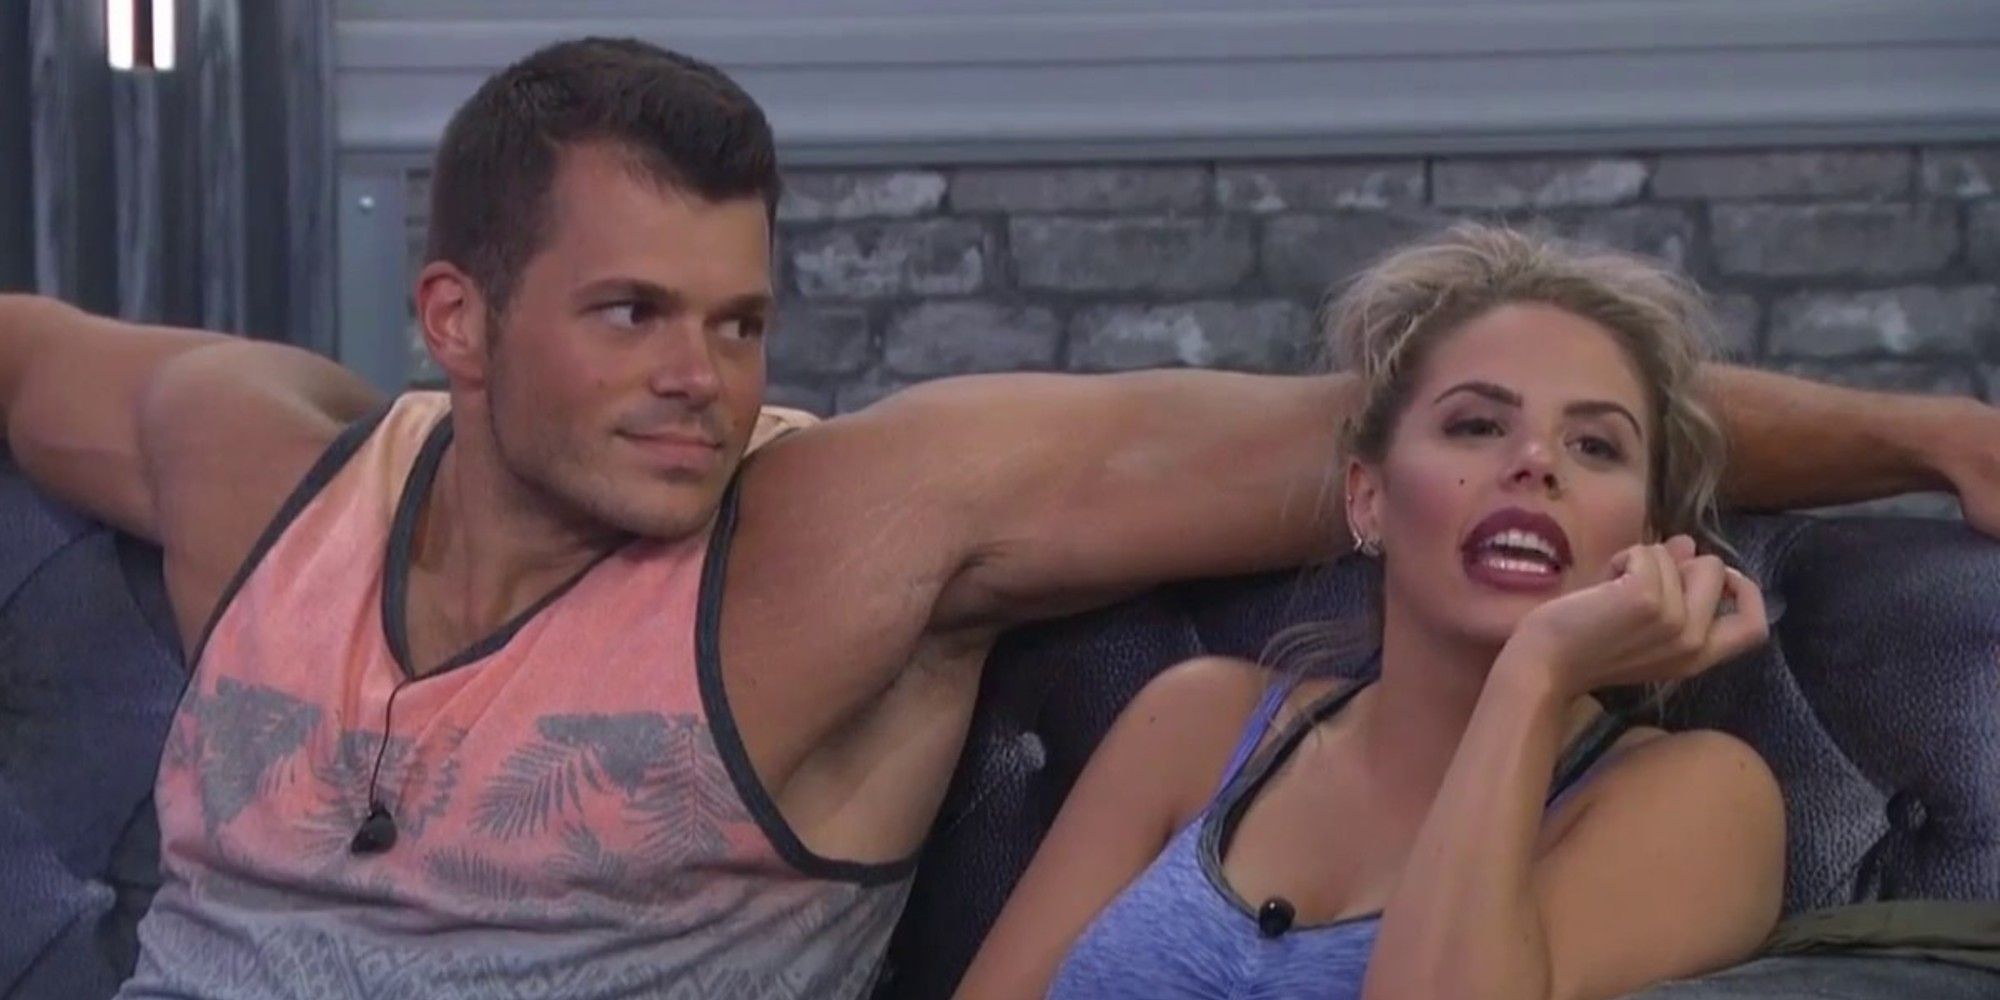 Mark and Elena sitting together on the couch on Big Brother.